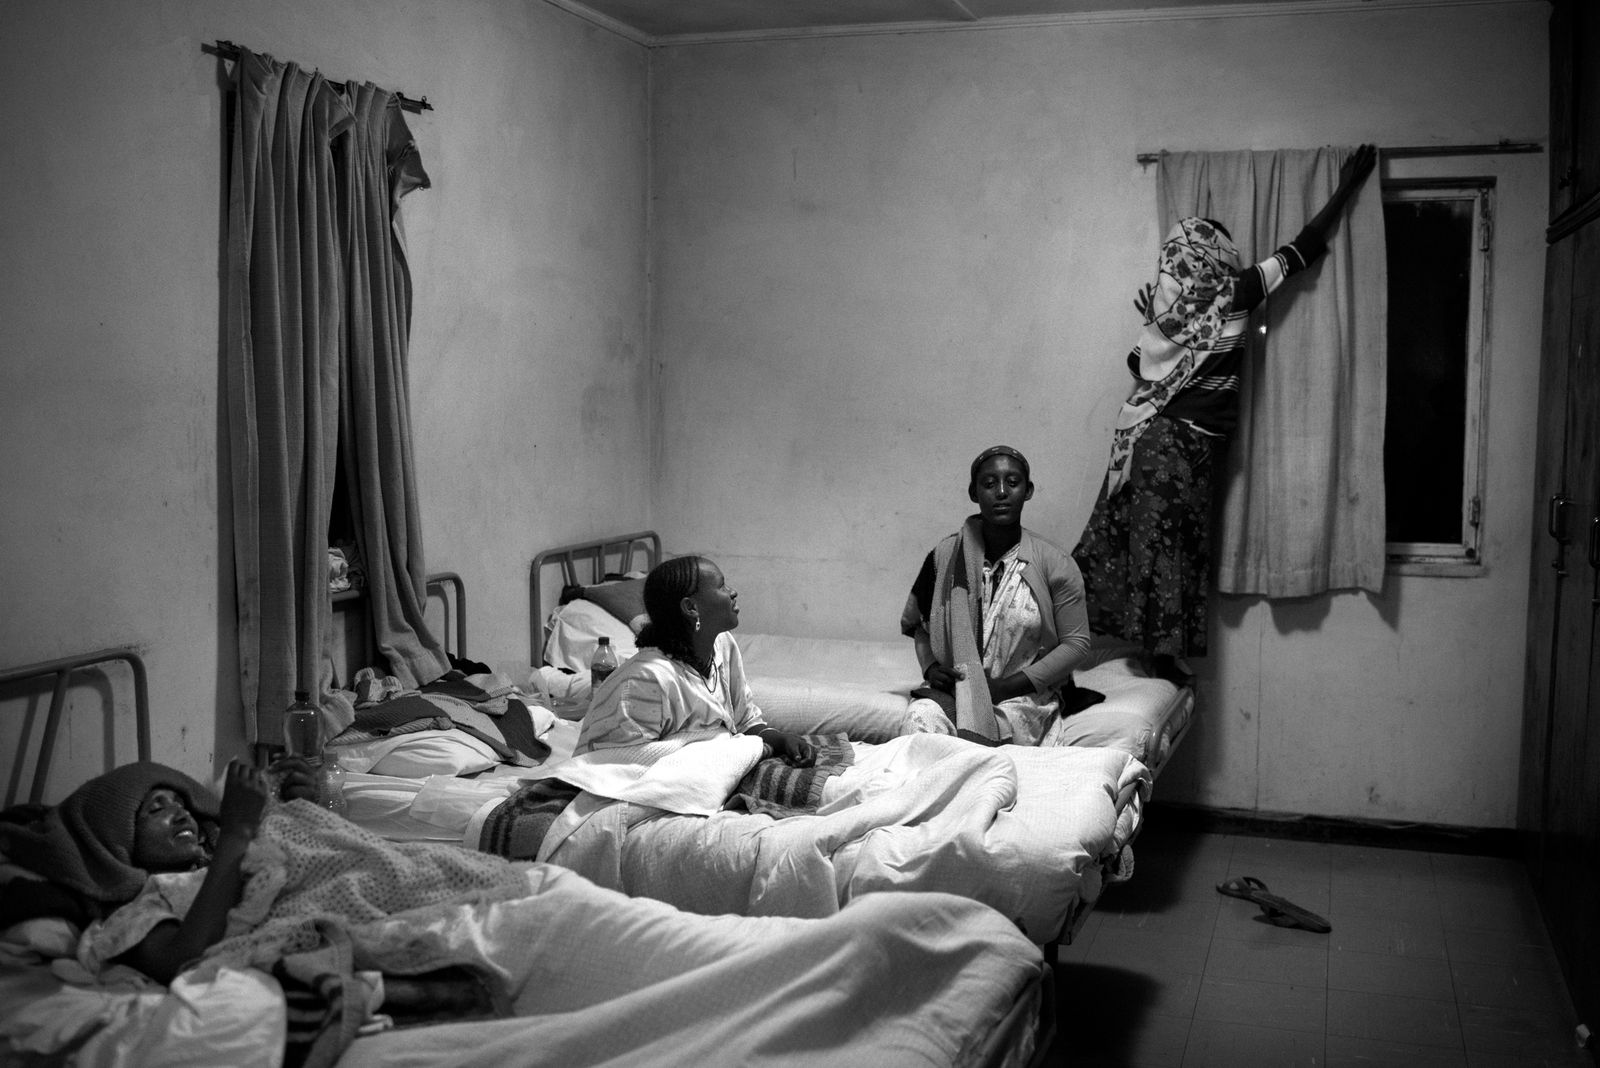 © Ida Guldbaek Arentsen - The women are preparing for bedtime at the hospitals rehabilitation centre outside Addis Ababa.